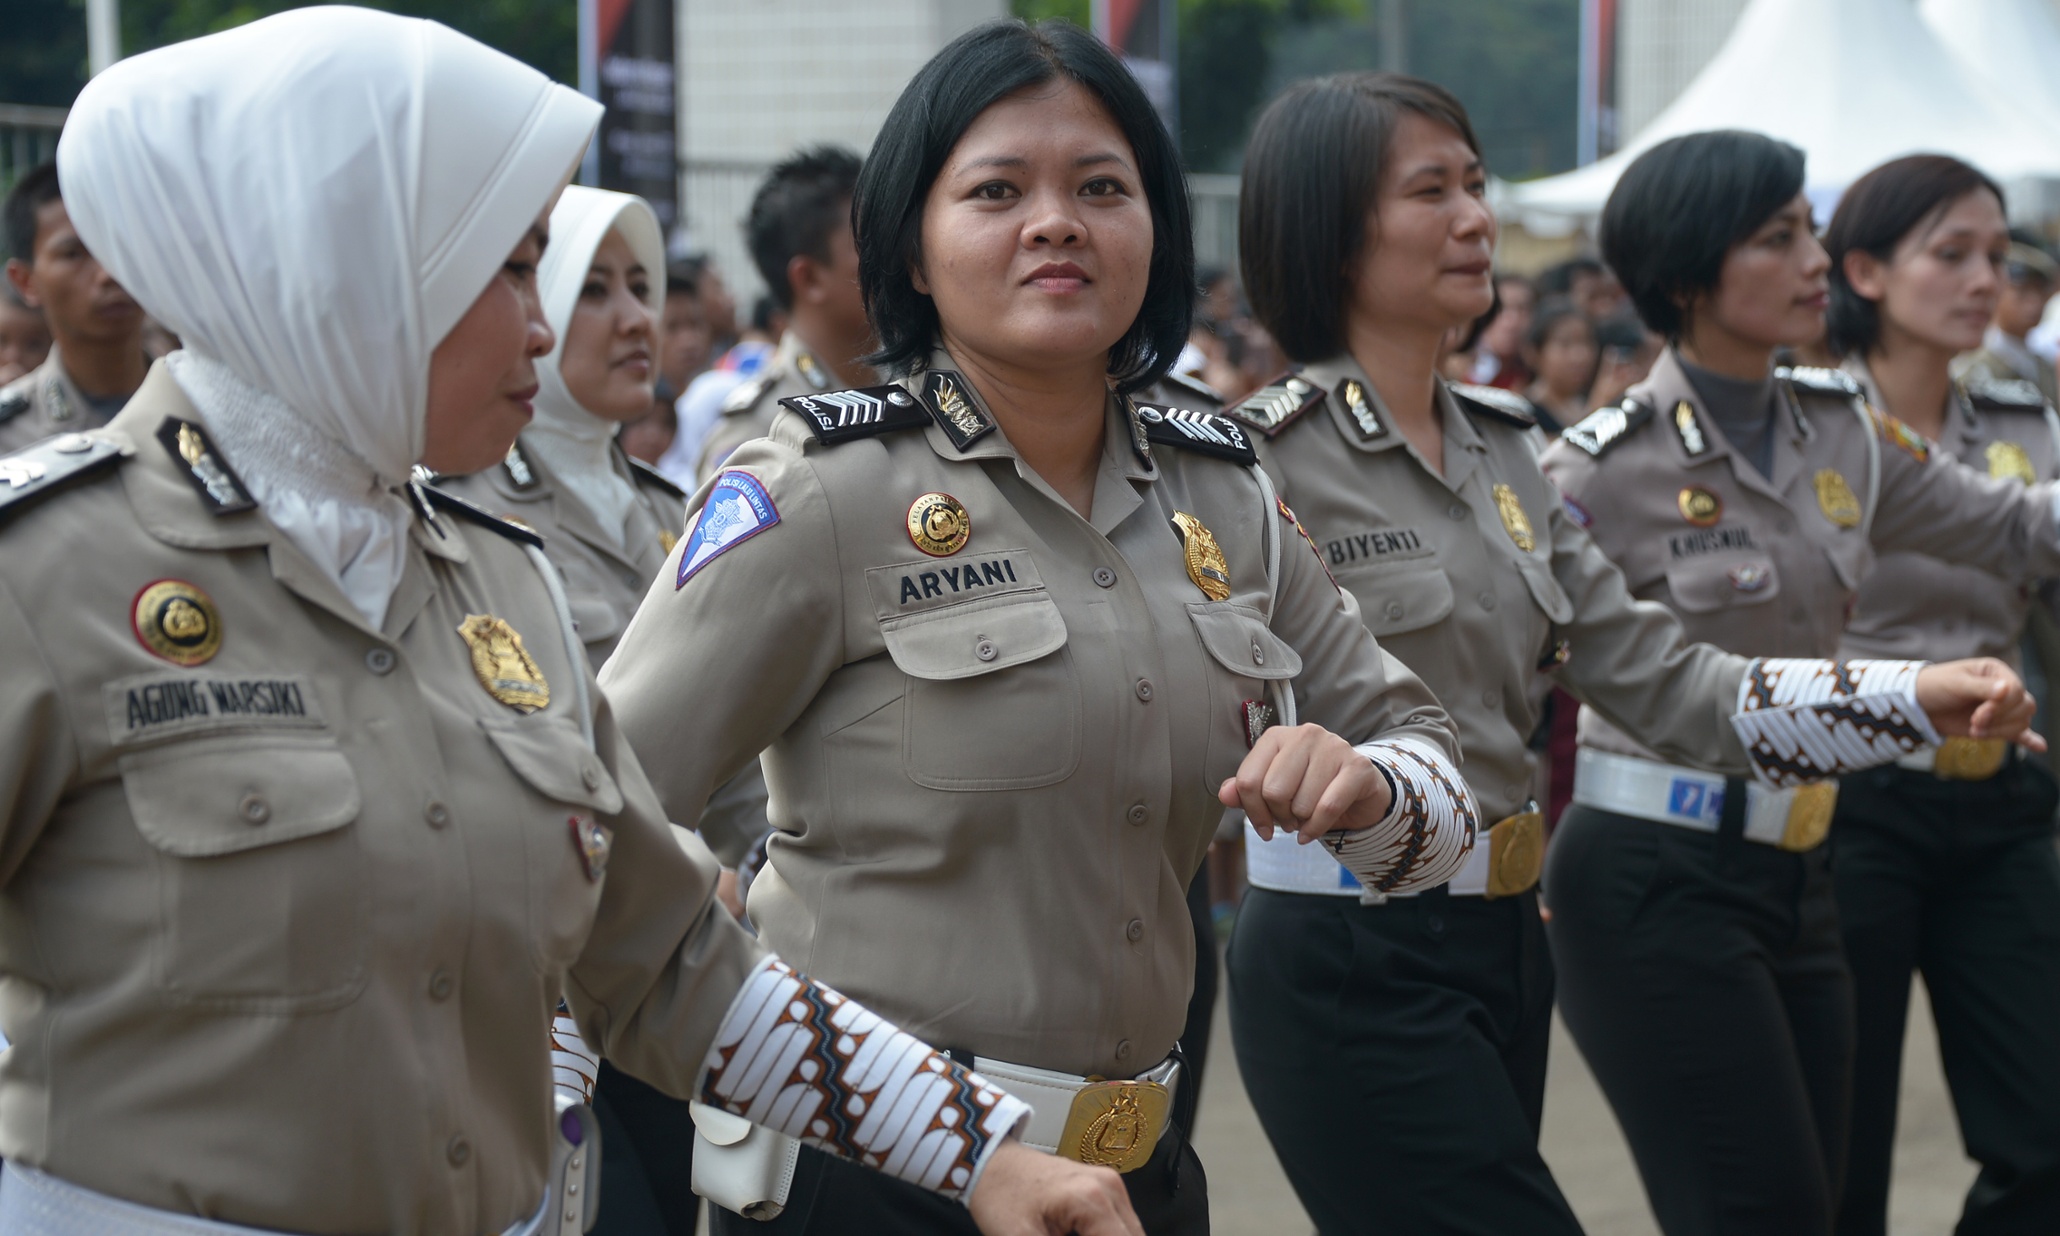 Female Indonesian Police Recruits Forced To Undergo Virginity Tests